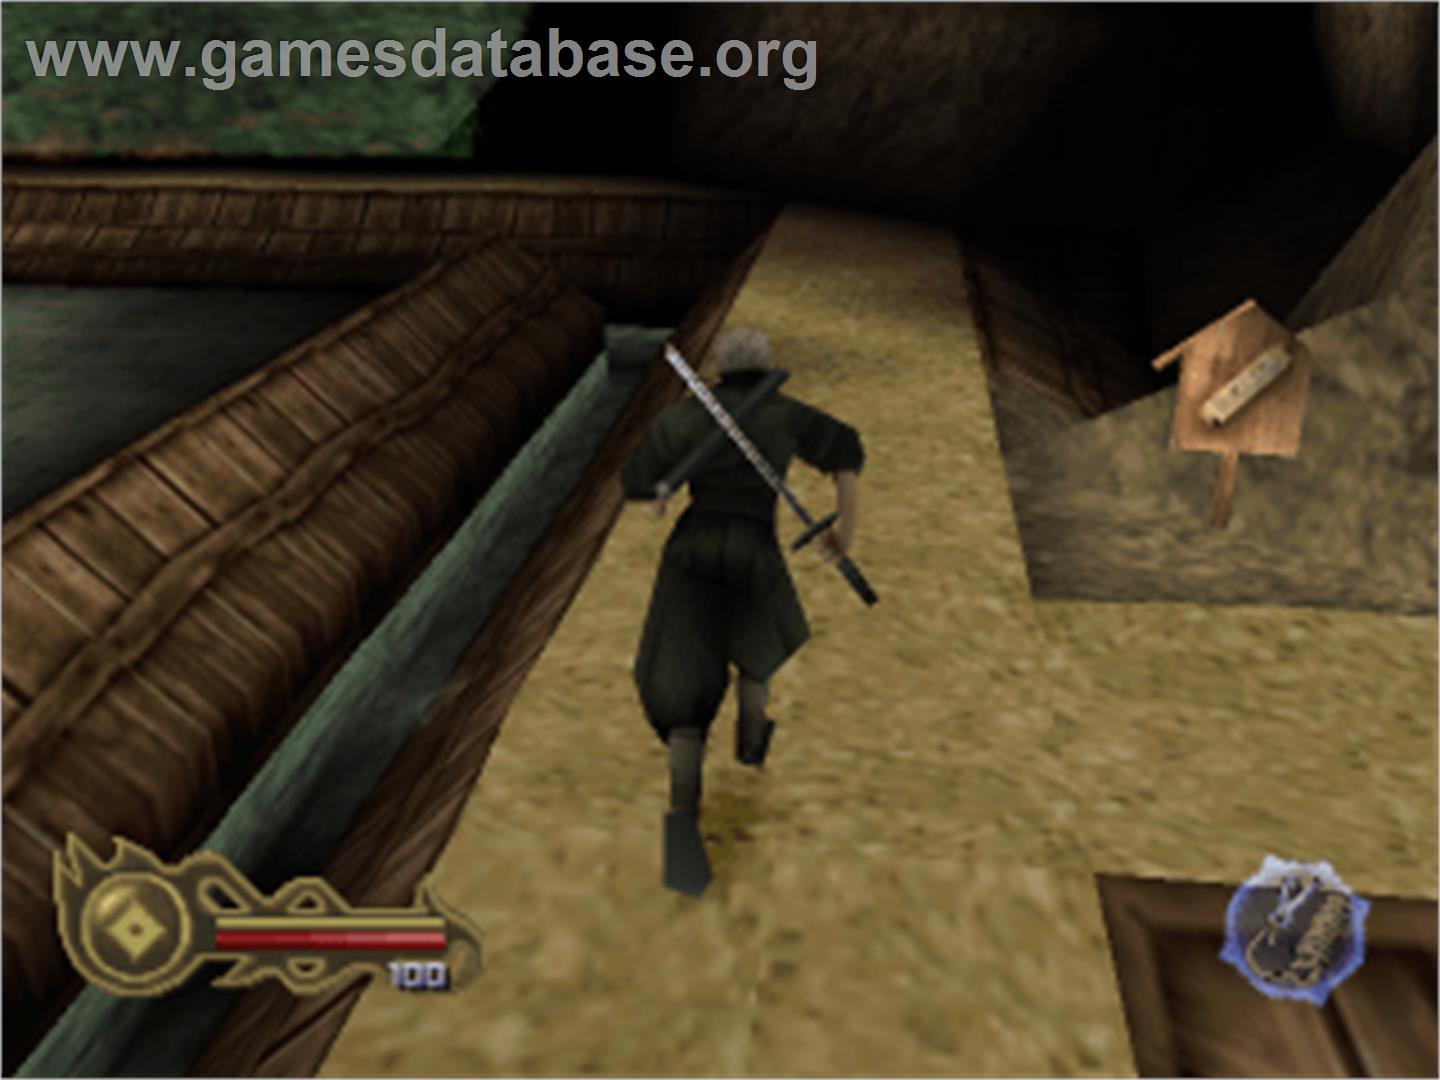 Tenchu 2: Birth of the Stealth Assassins - Sony Playstation - Artwork - In Game